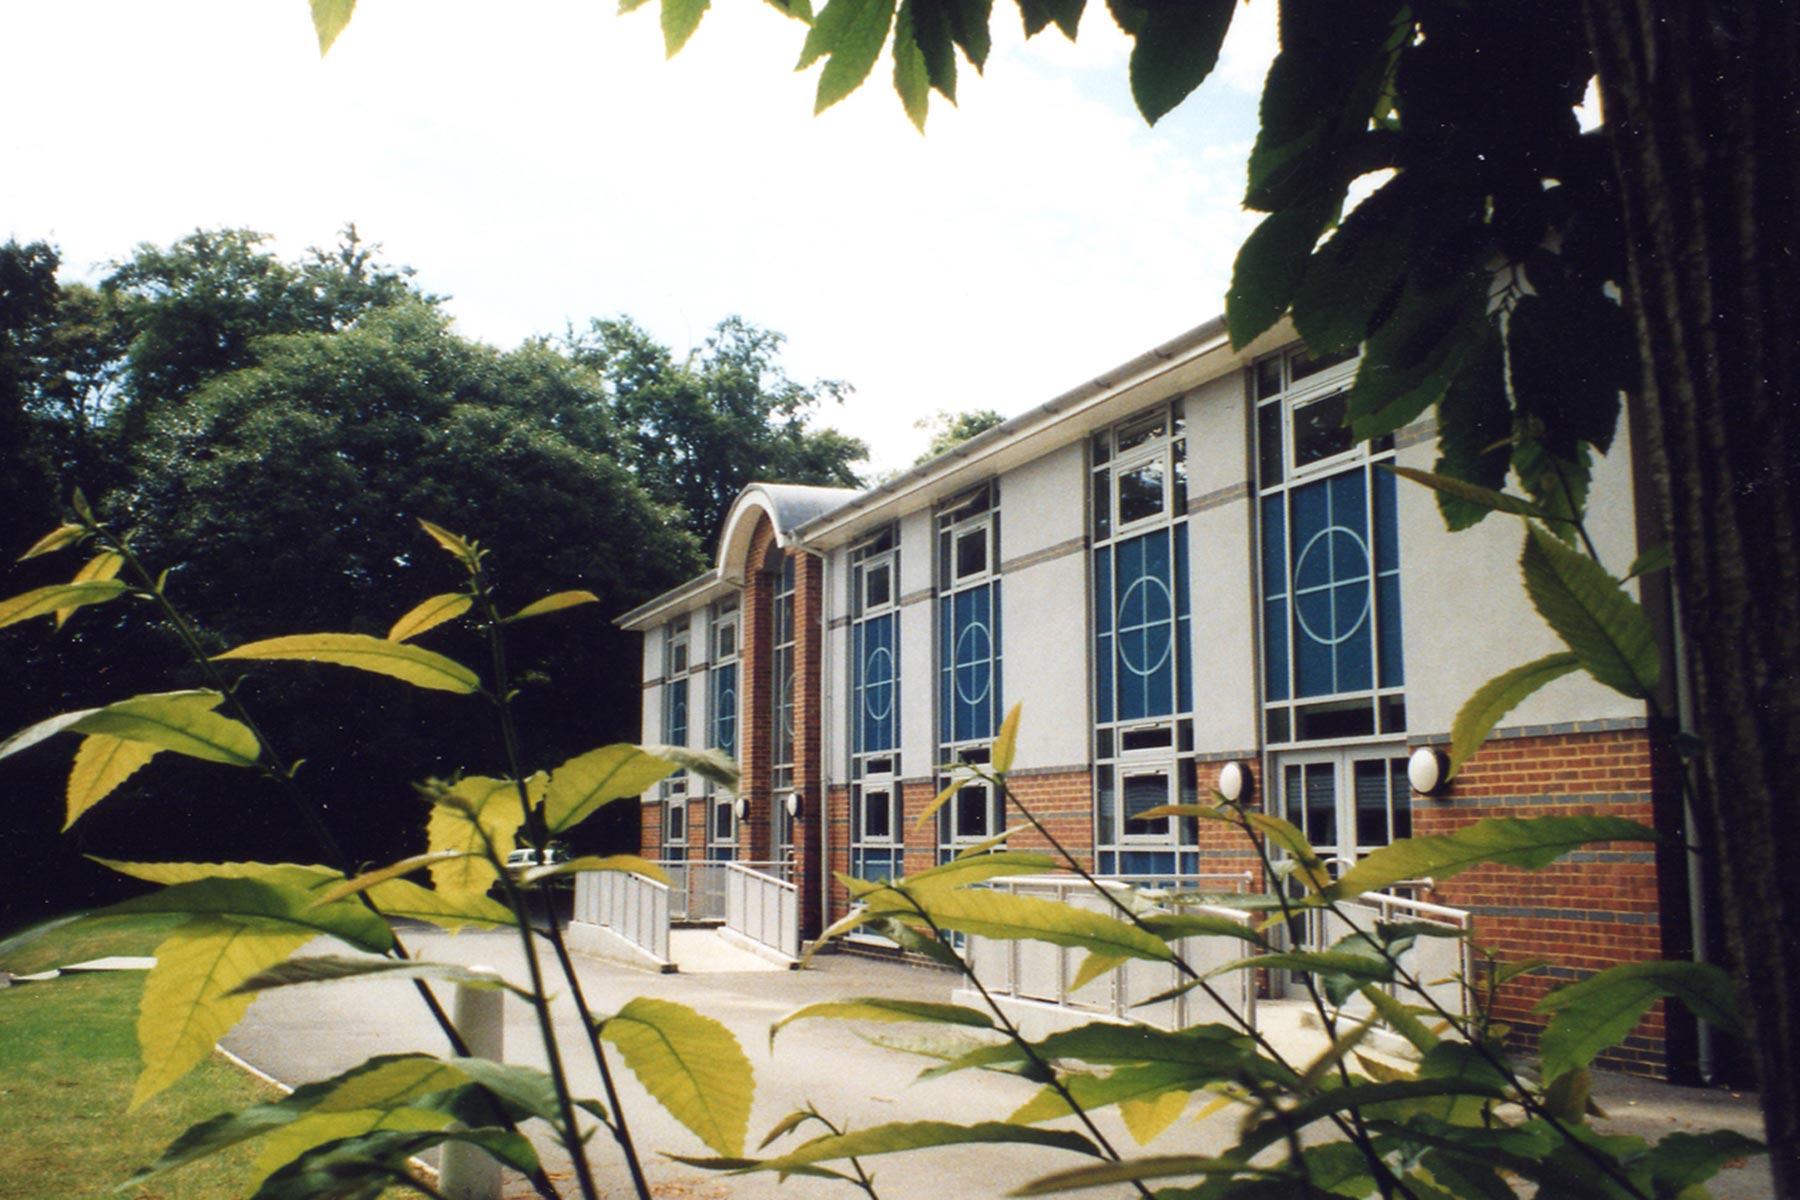 Reeds School - New Science Laboratory and classroom building